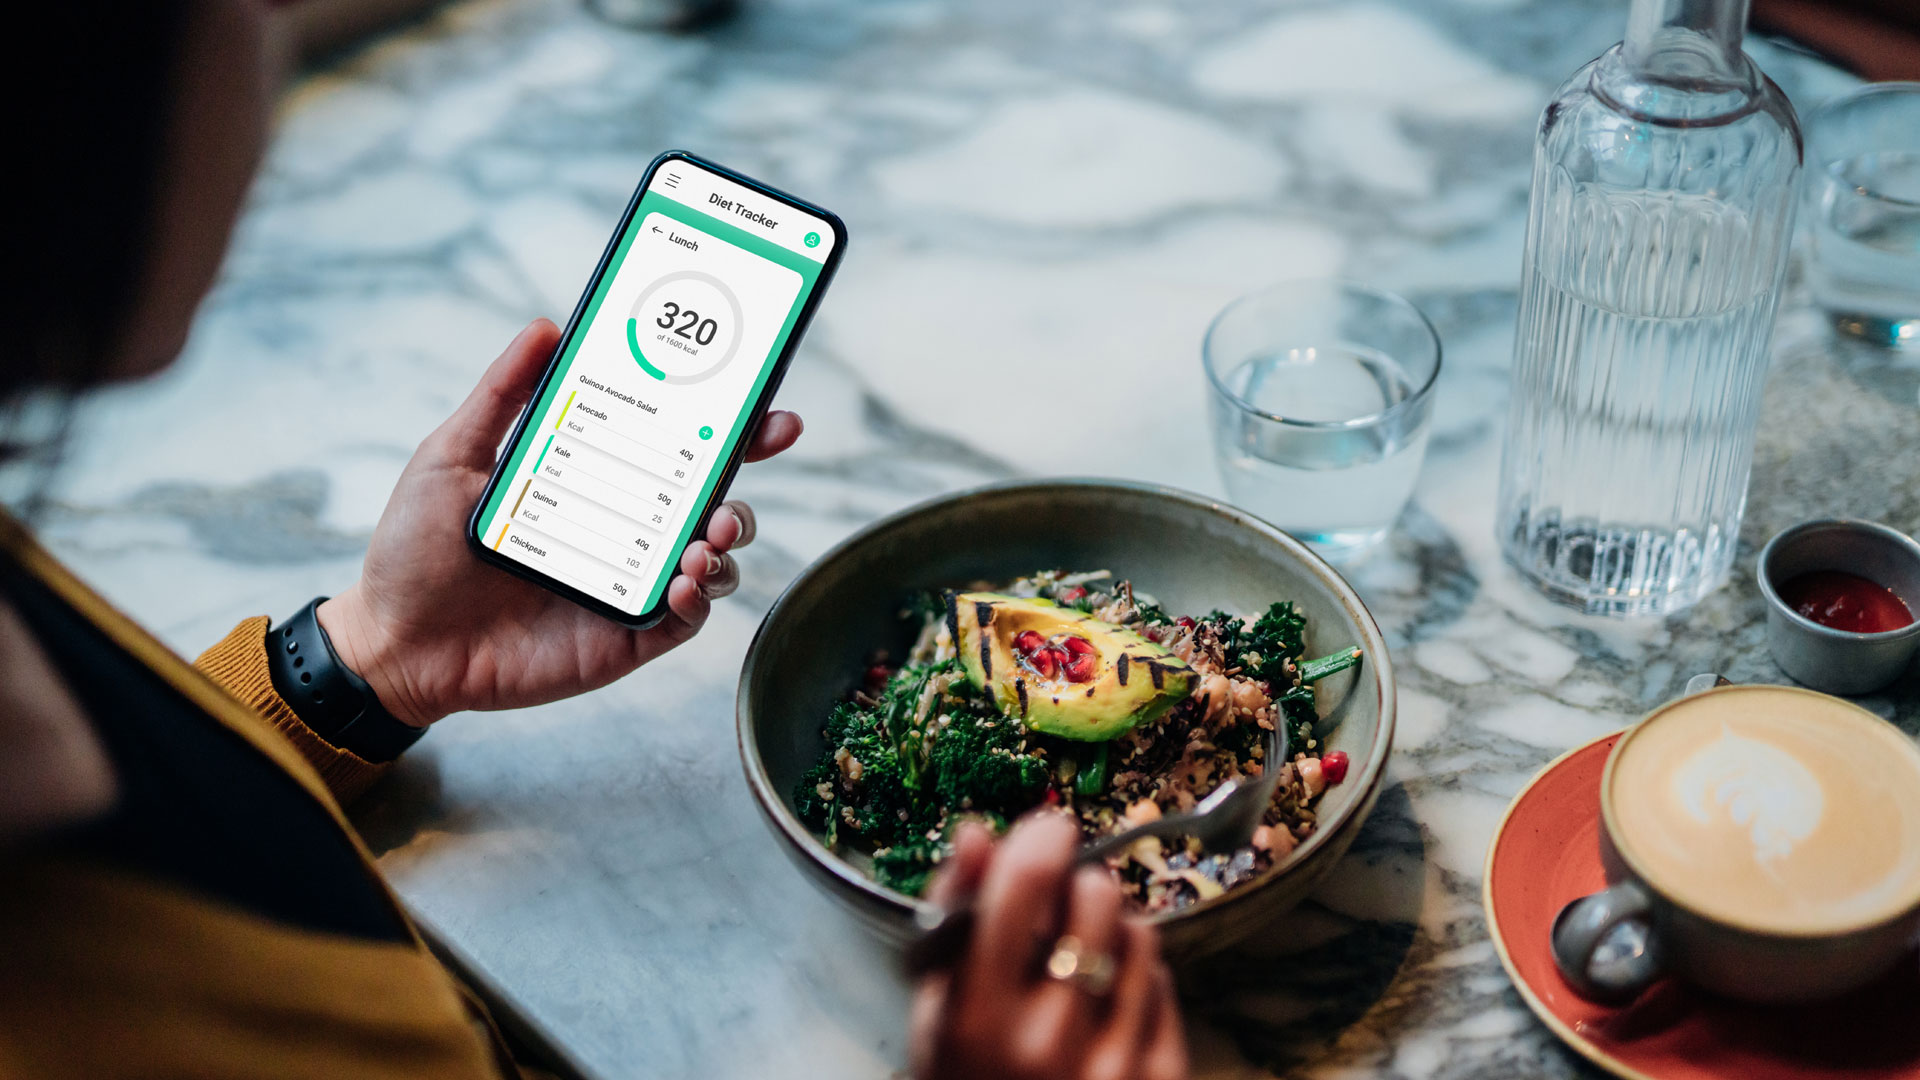 Image shows food and calorie tracking app on phone